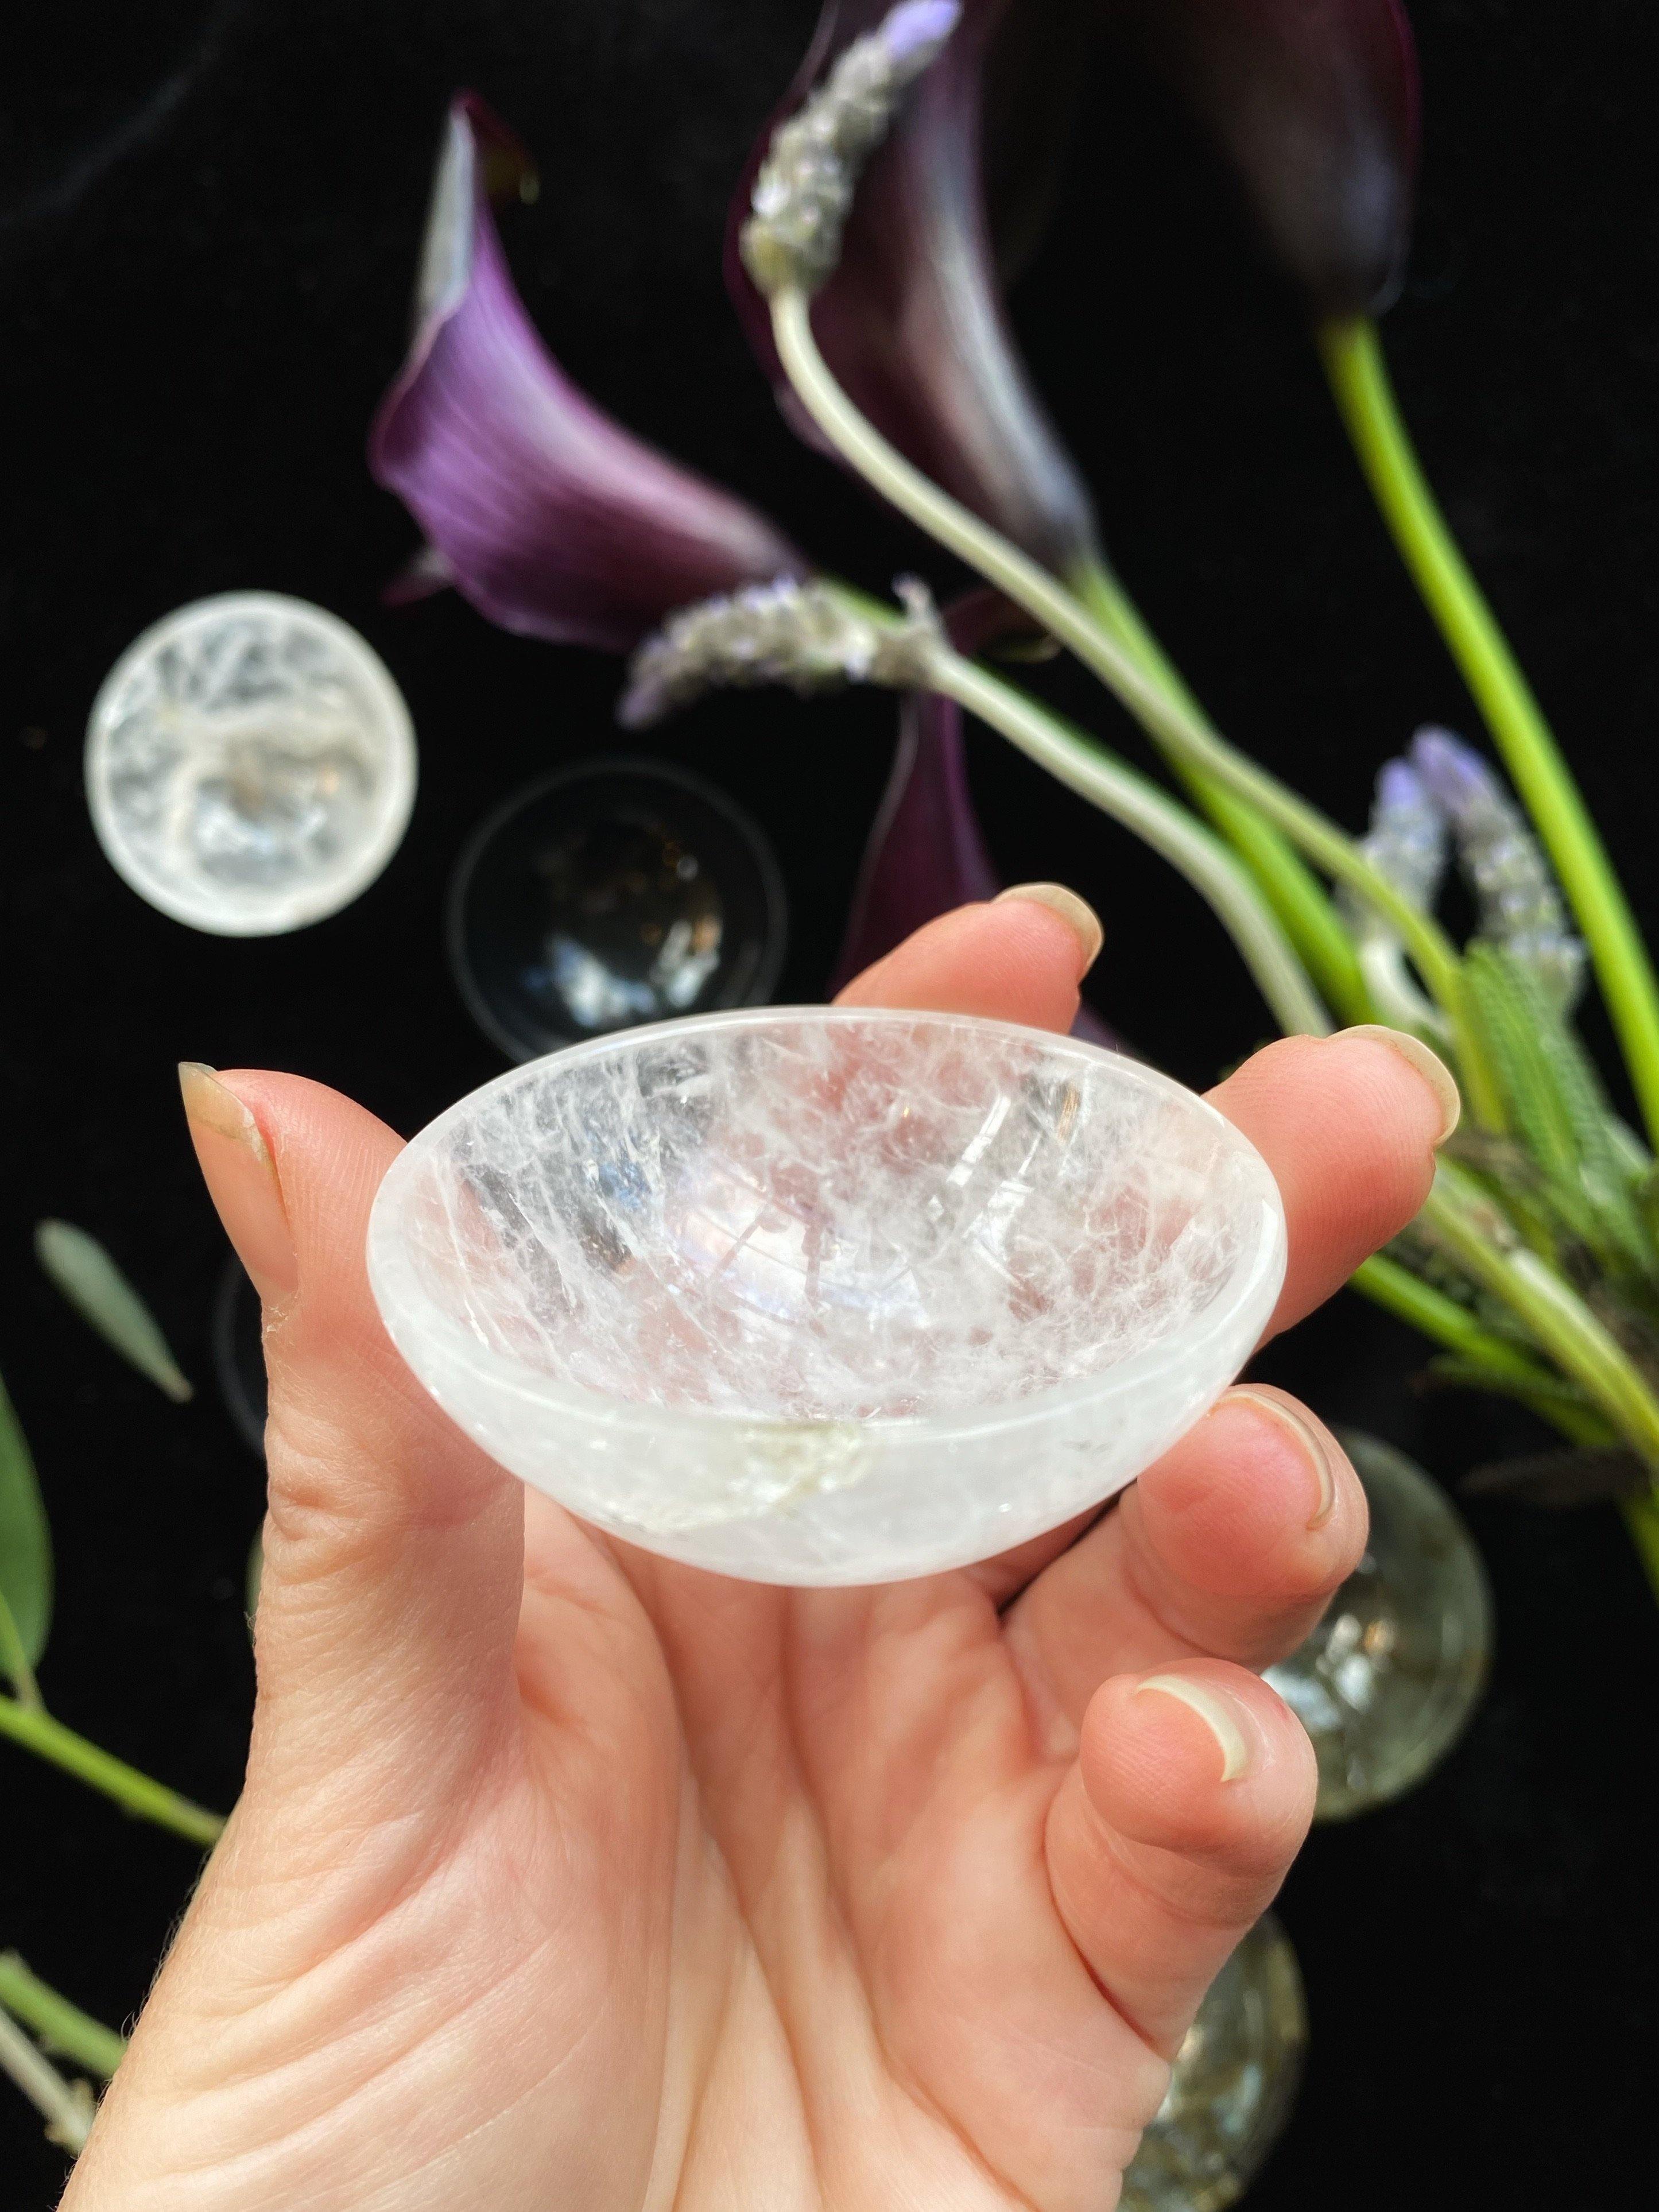 Solid Crystal Offering Bowls - 2” or 3” - qmeb